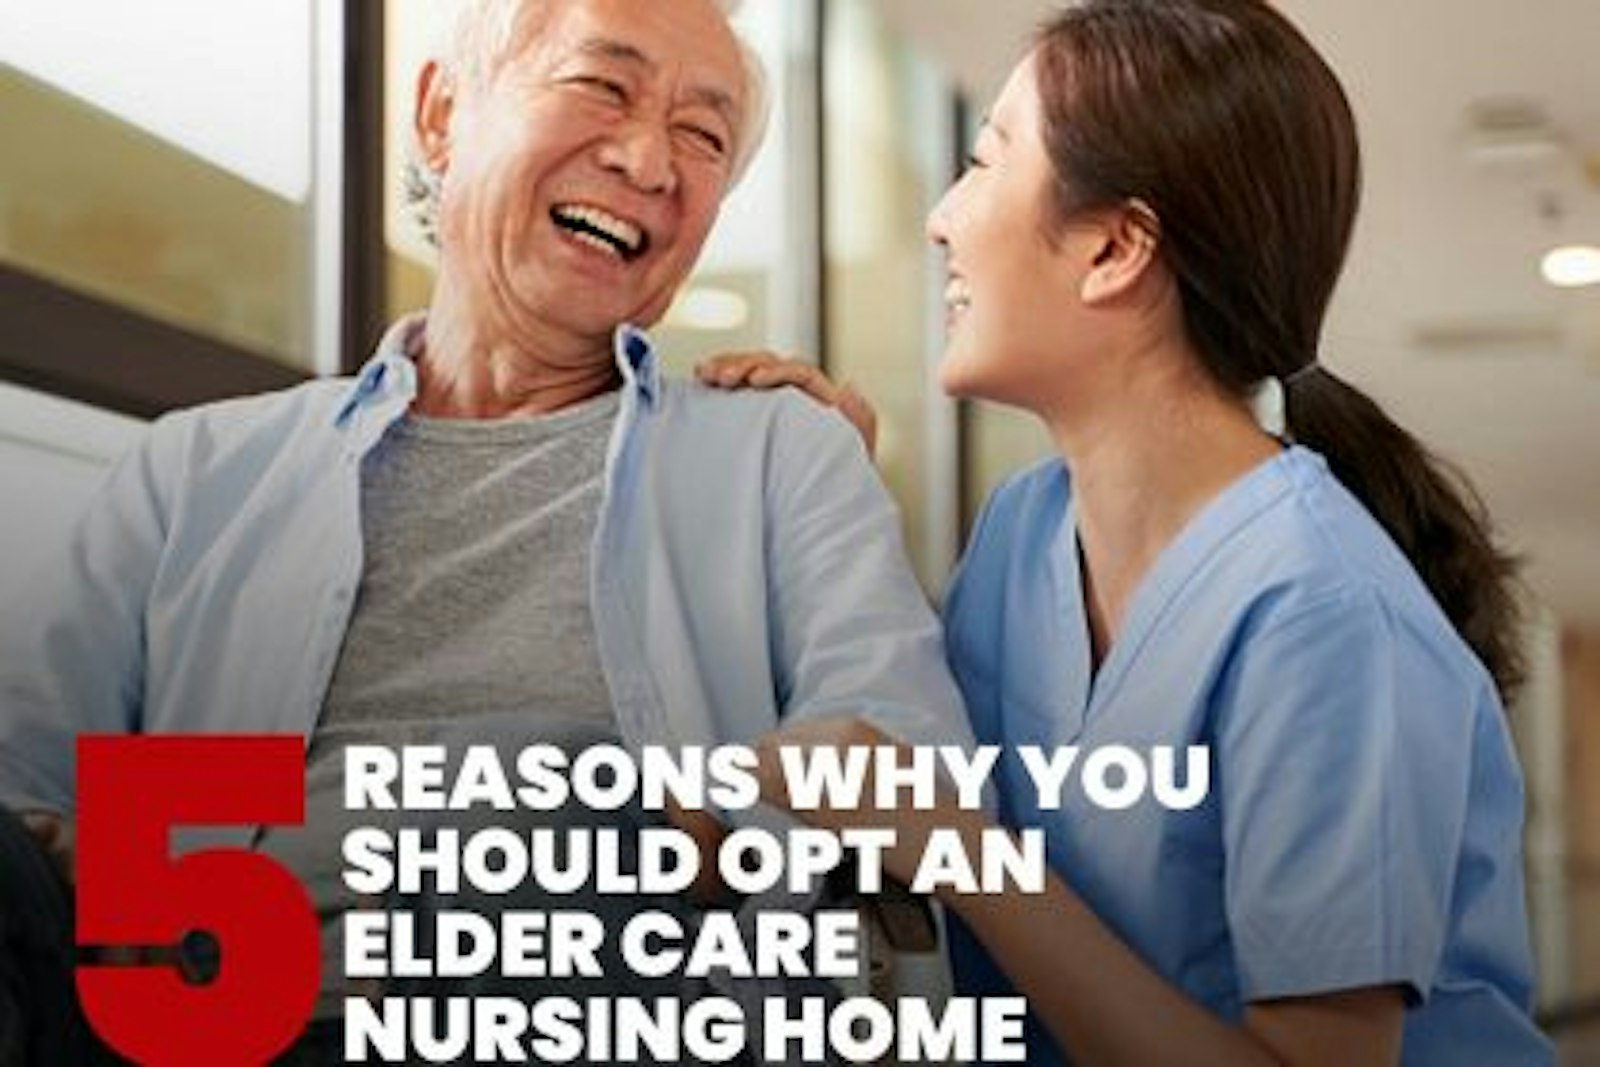 5 REASONS WHY YOU SHOULD OPT AN ELDER CARE NURSING HOME